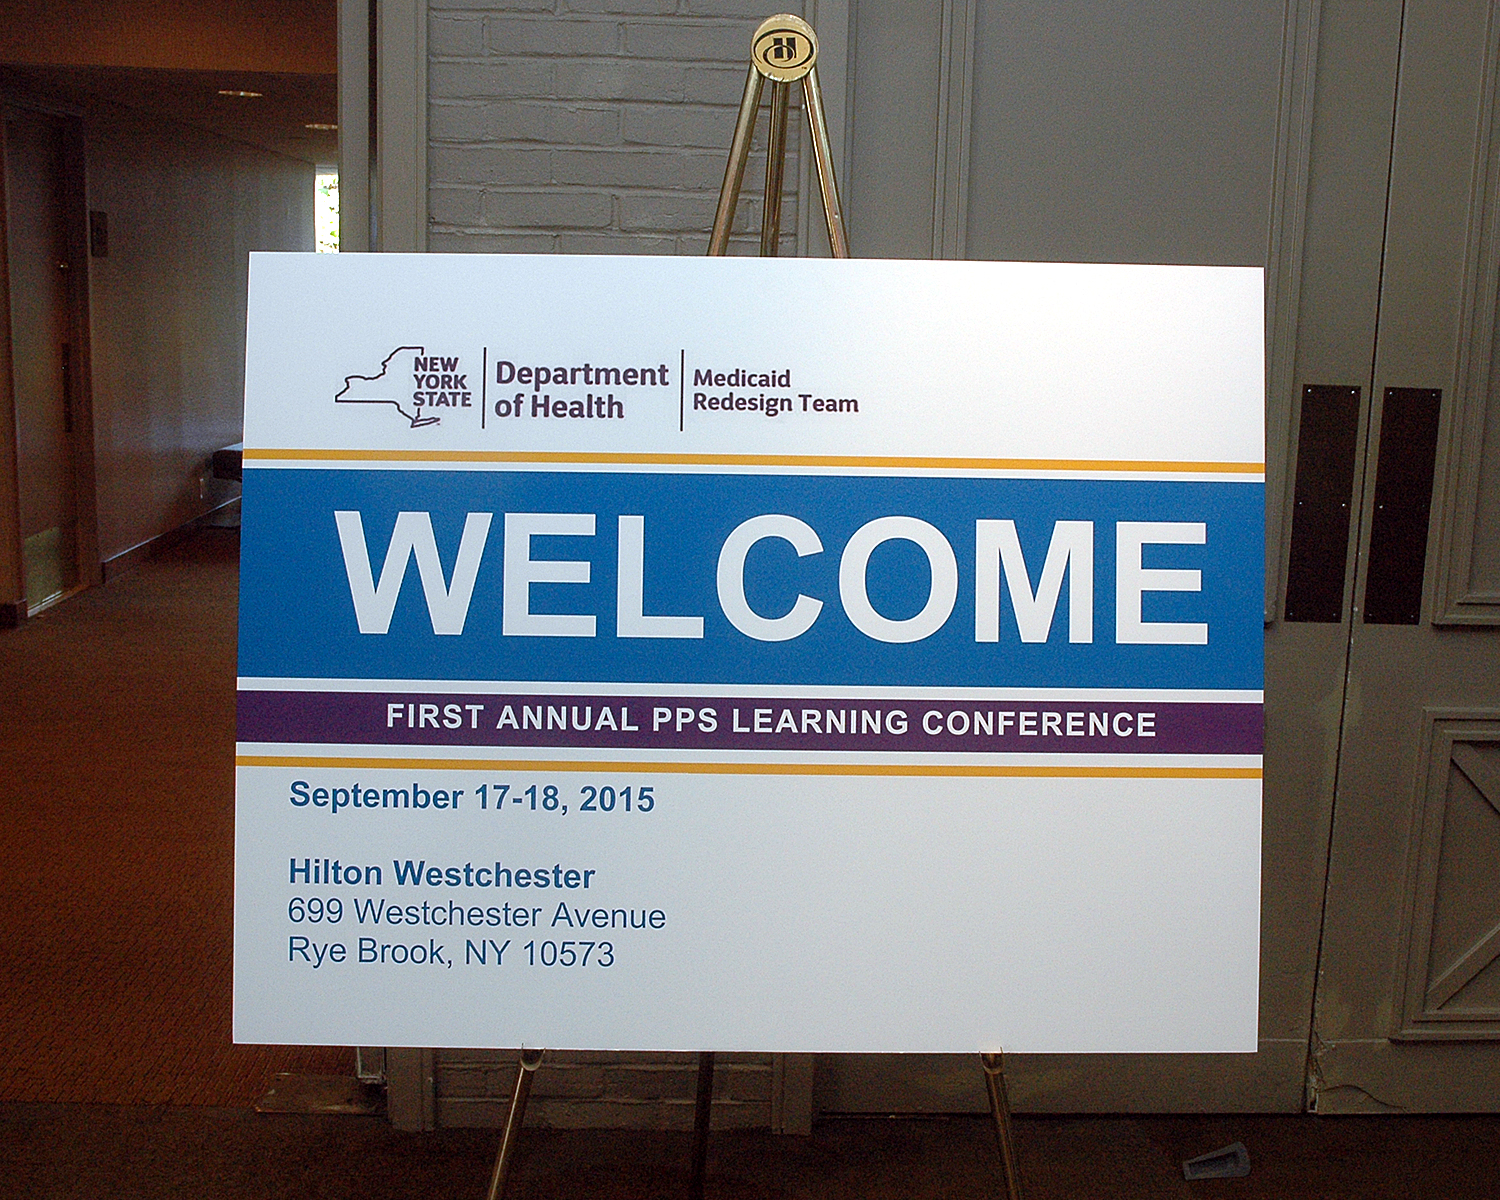 Welcome to the First Annual PPS Learning Conference